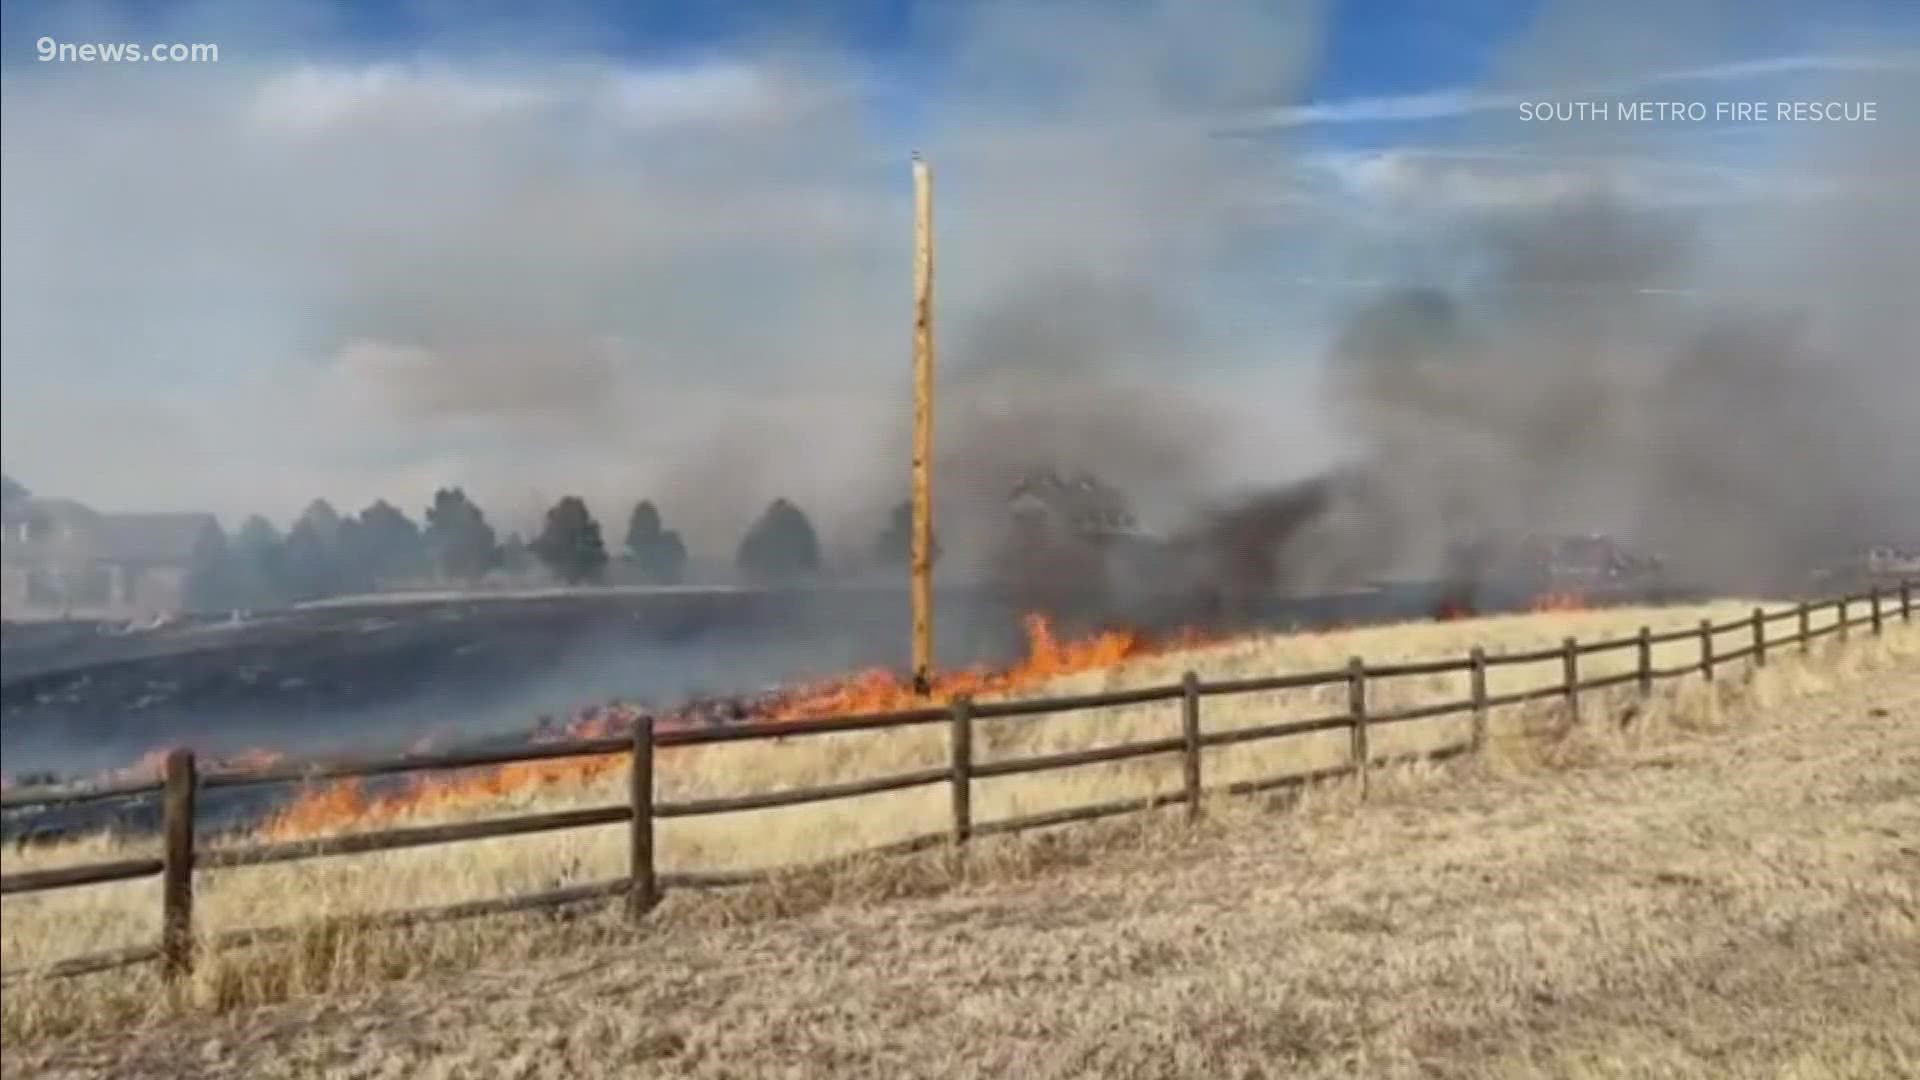 A wildfire on the east side of U.S. 85 in Douglas County is now 100 percent contained. The cause of the blaze is under investigation.